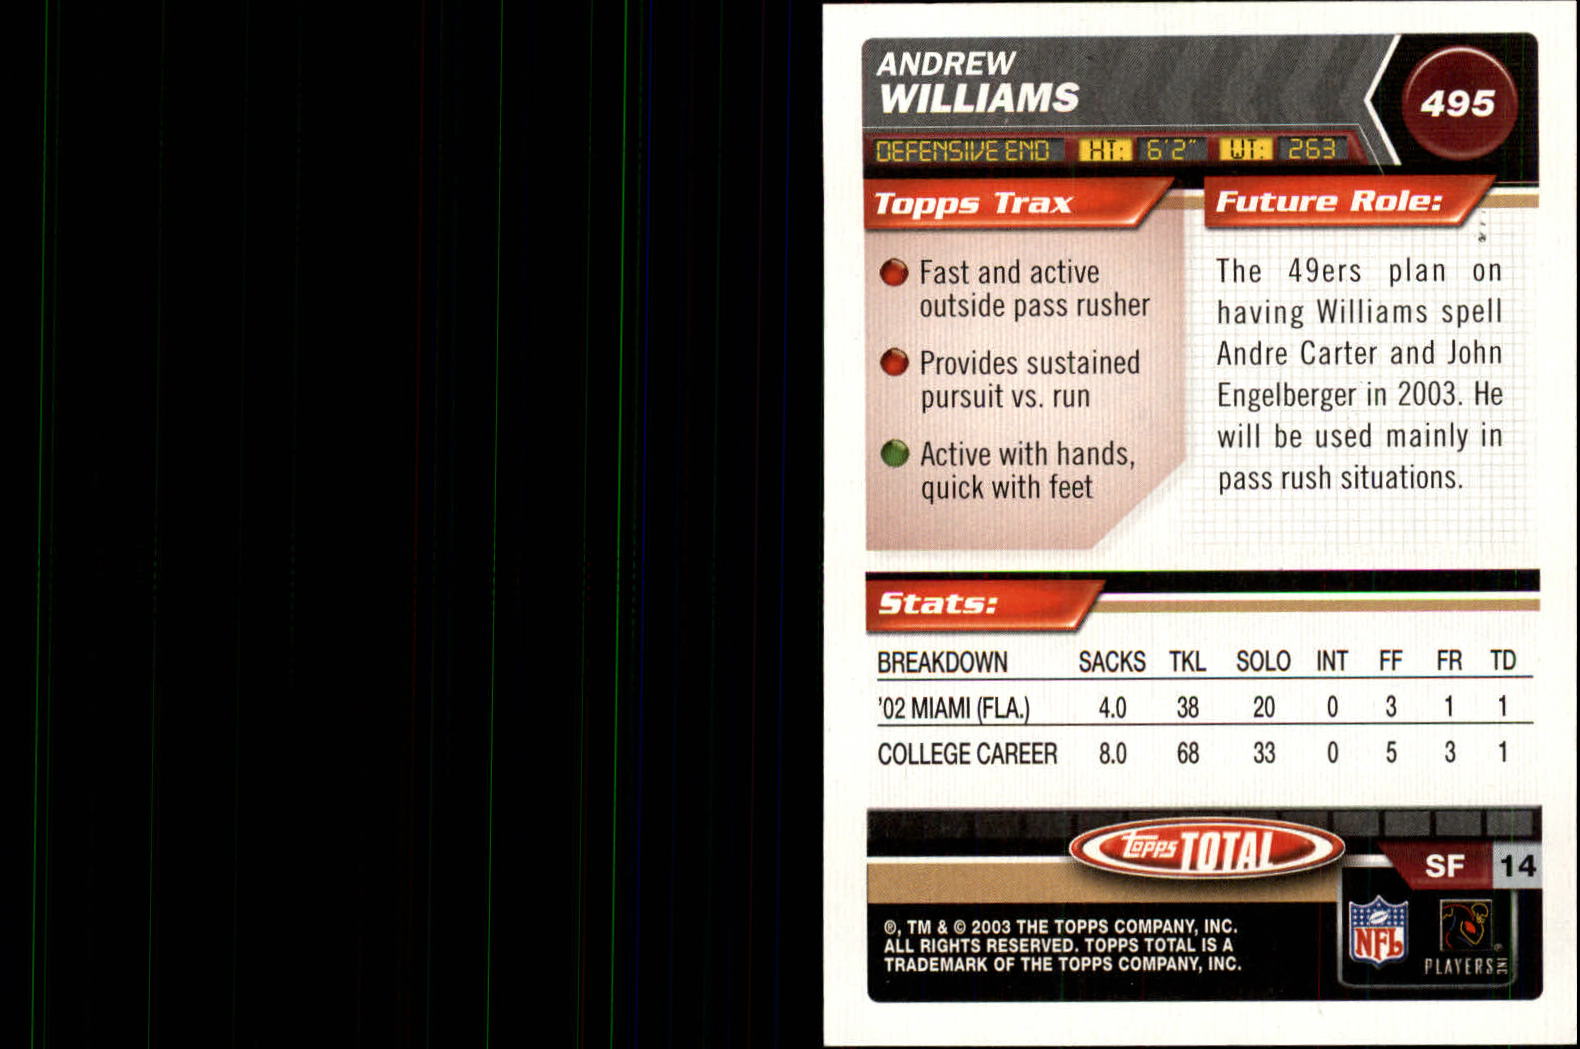 2003 Topps Total #495 Andrew Williams RC back image